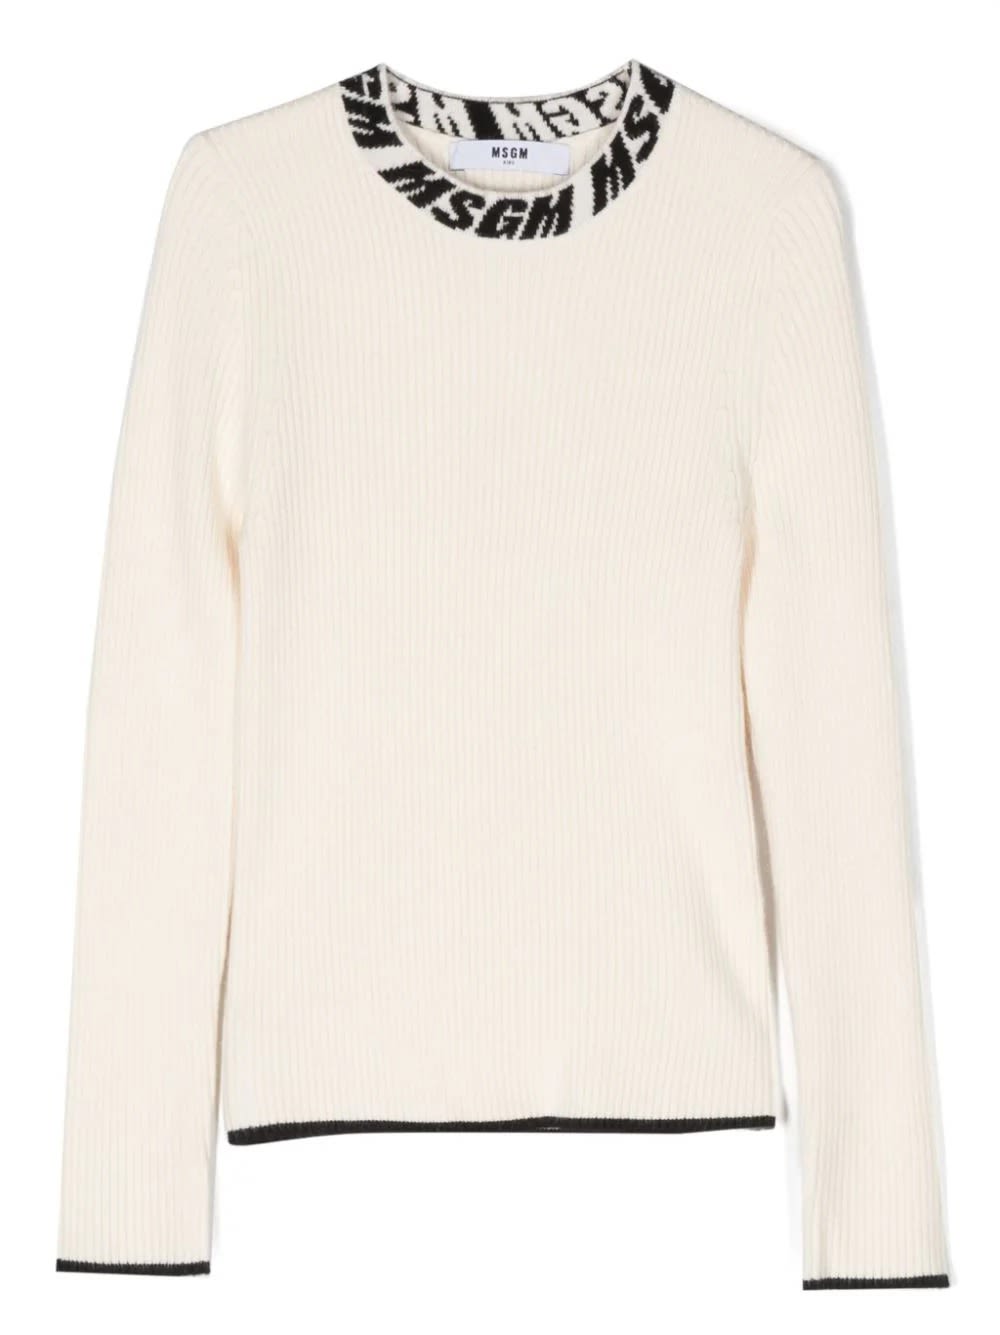 MSGM CREAM RIBBED SWEATER WITH LOGO ON NECK